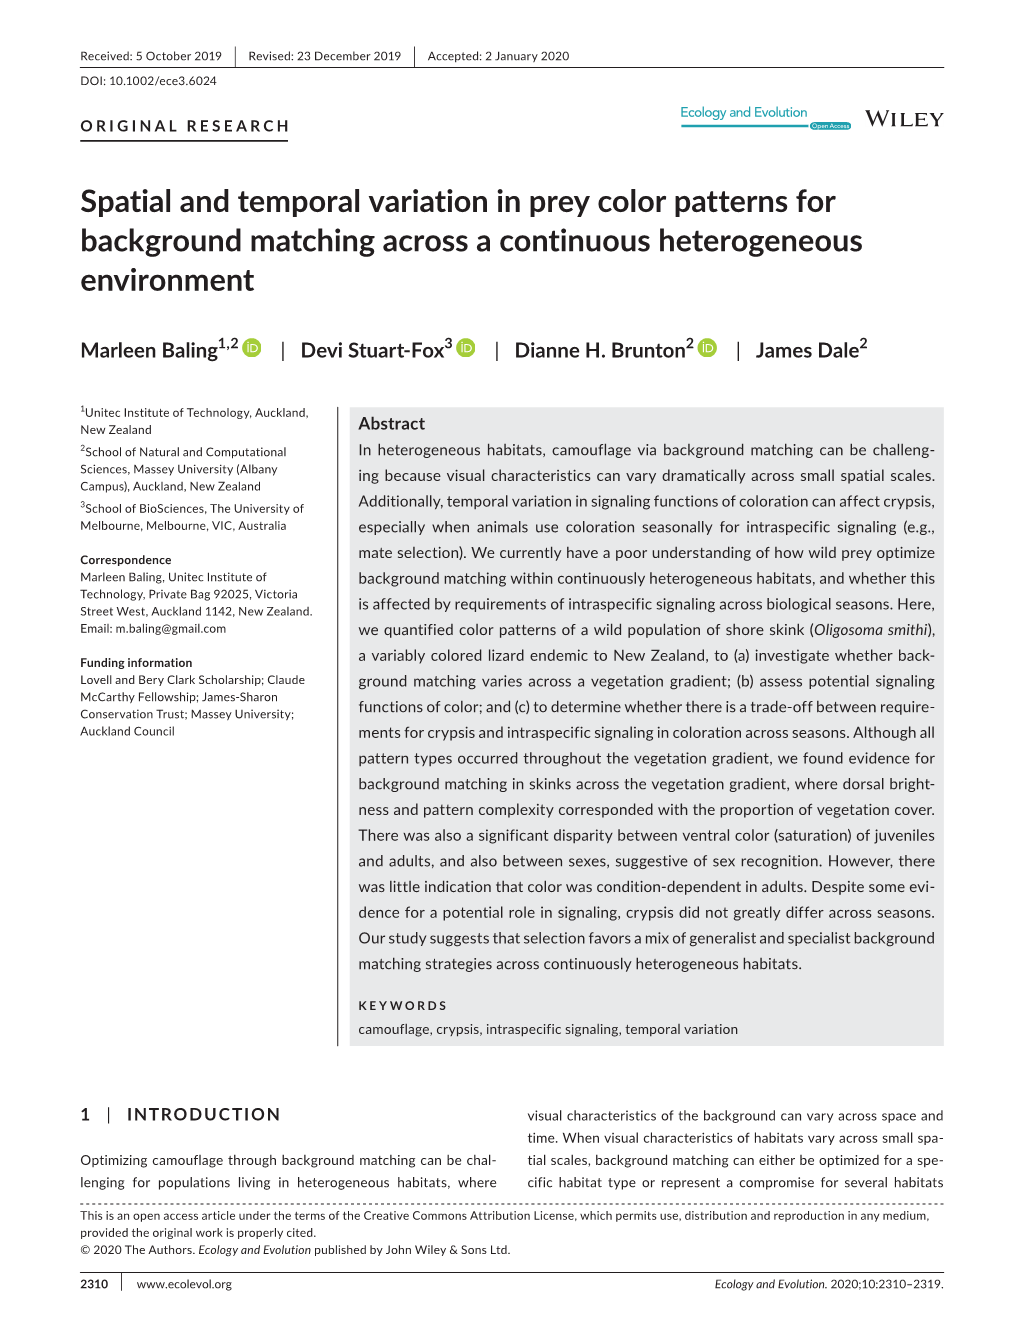 Spatial and Temporal Variation in Prey Color Patterns for Background Matching Across a Continuous Heterogeneous Environment